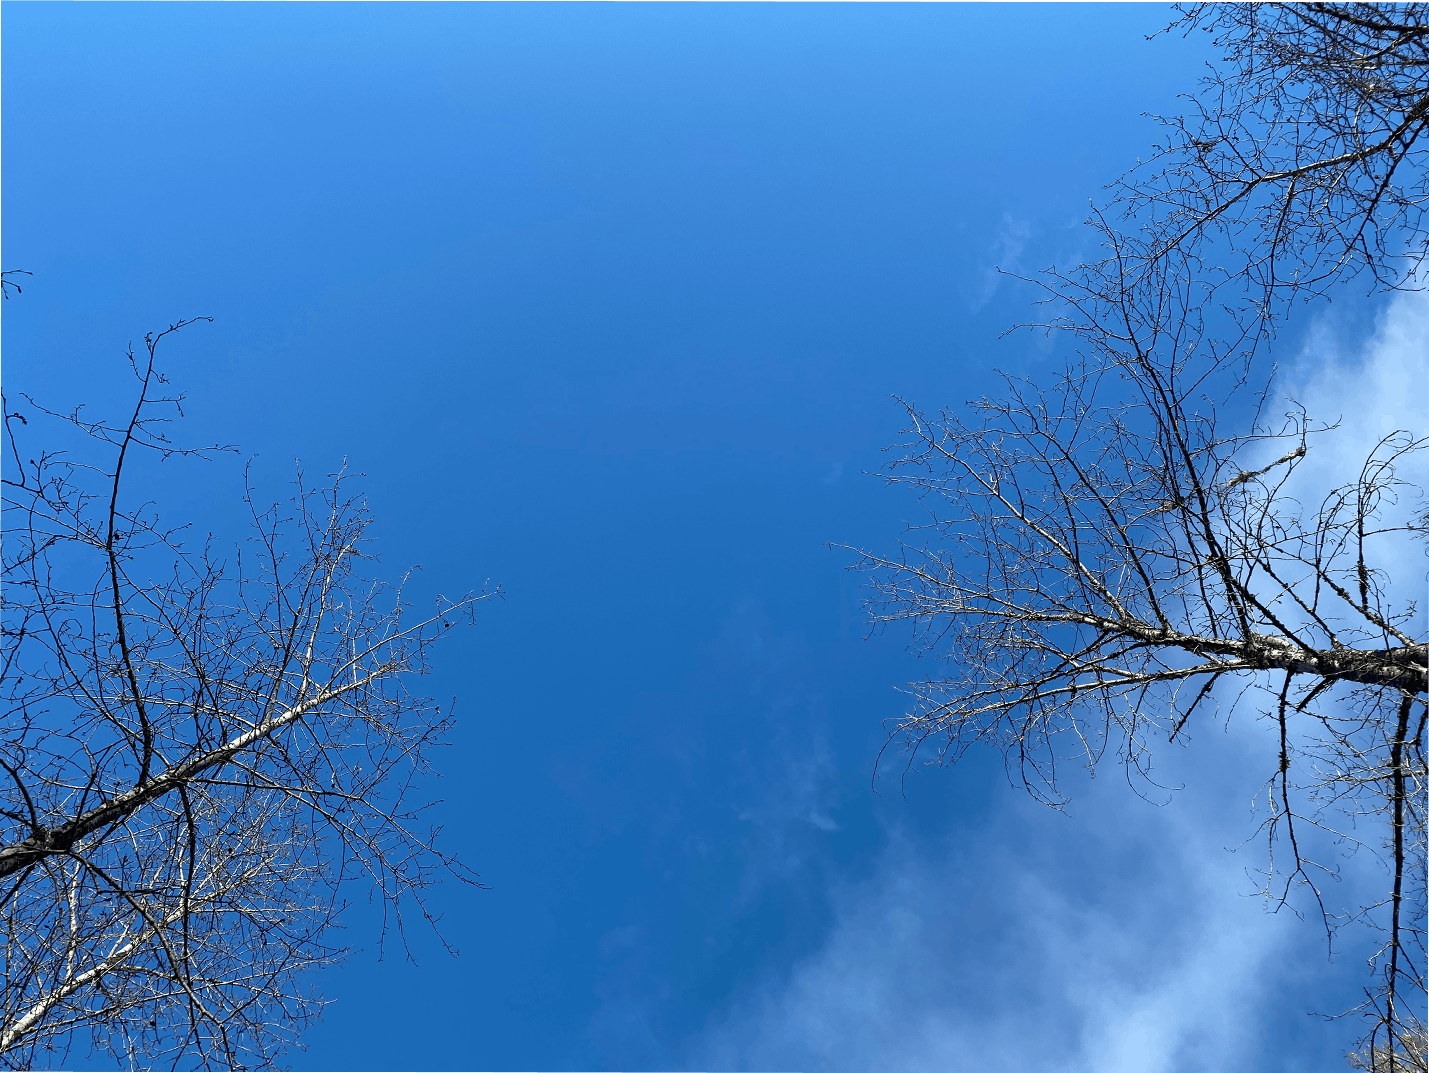 Background image of blue sky with silhouettes of tall majestic trees